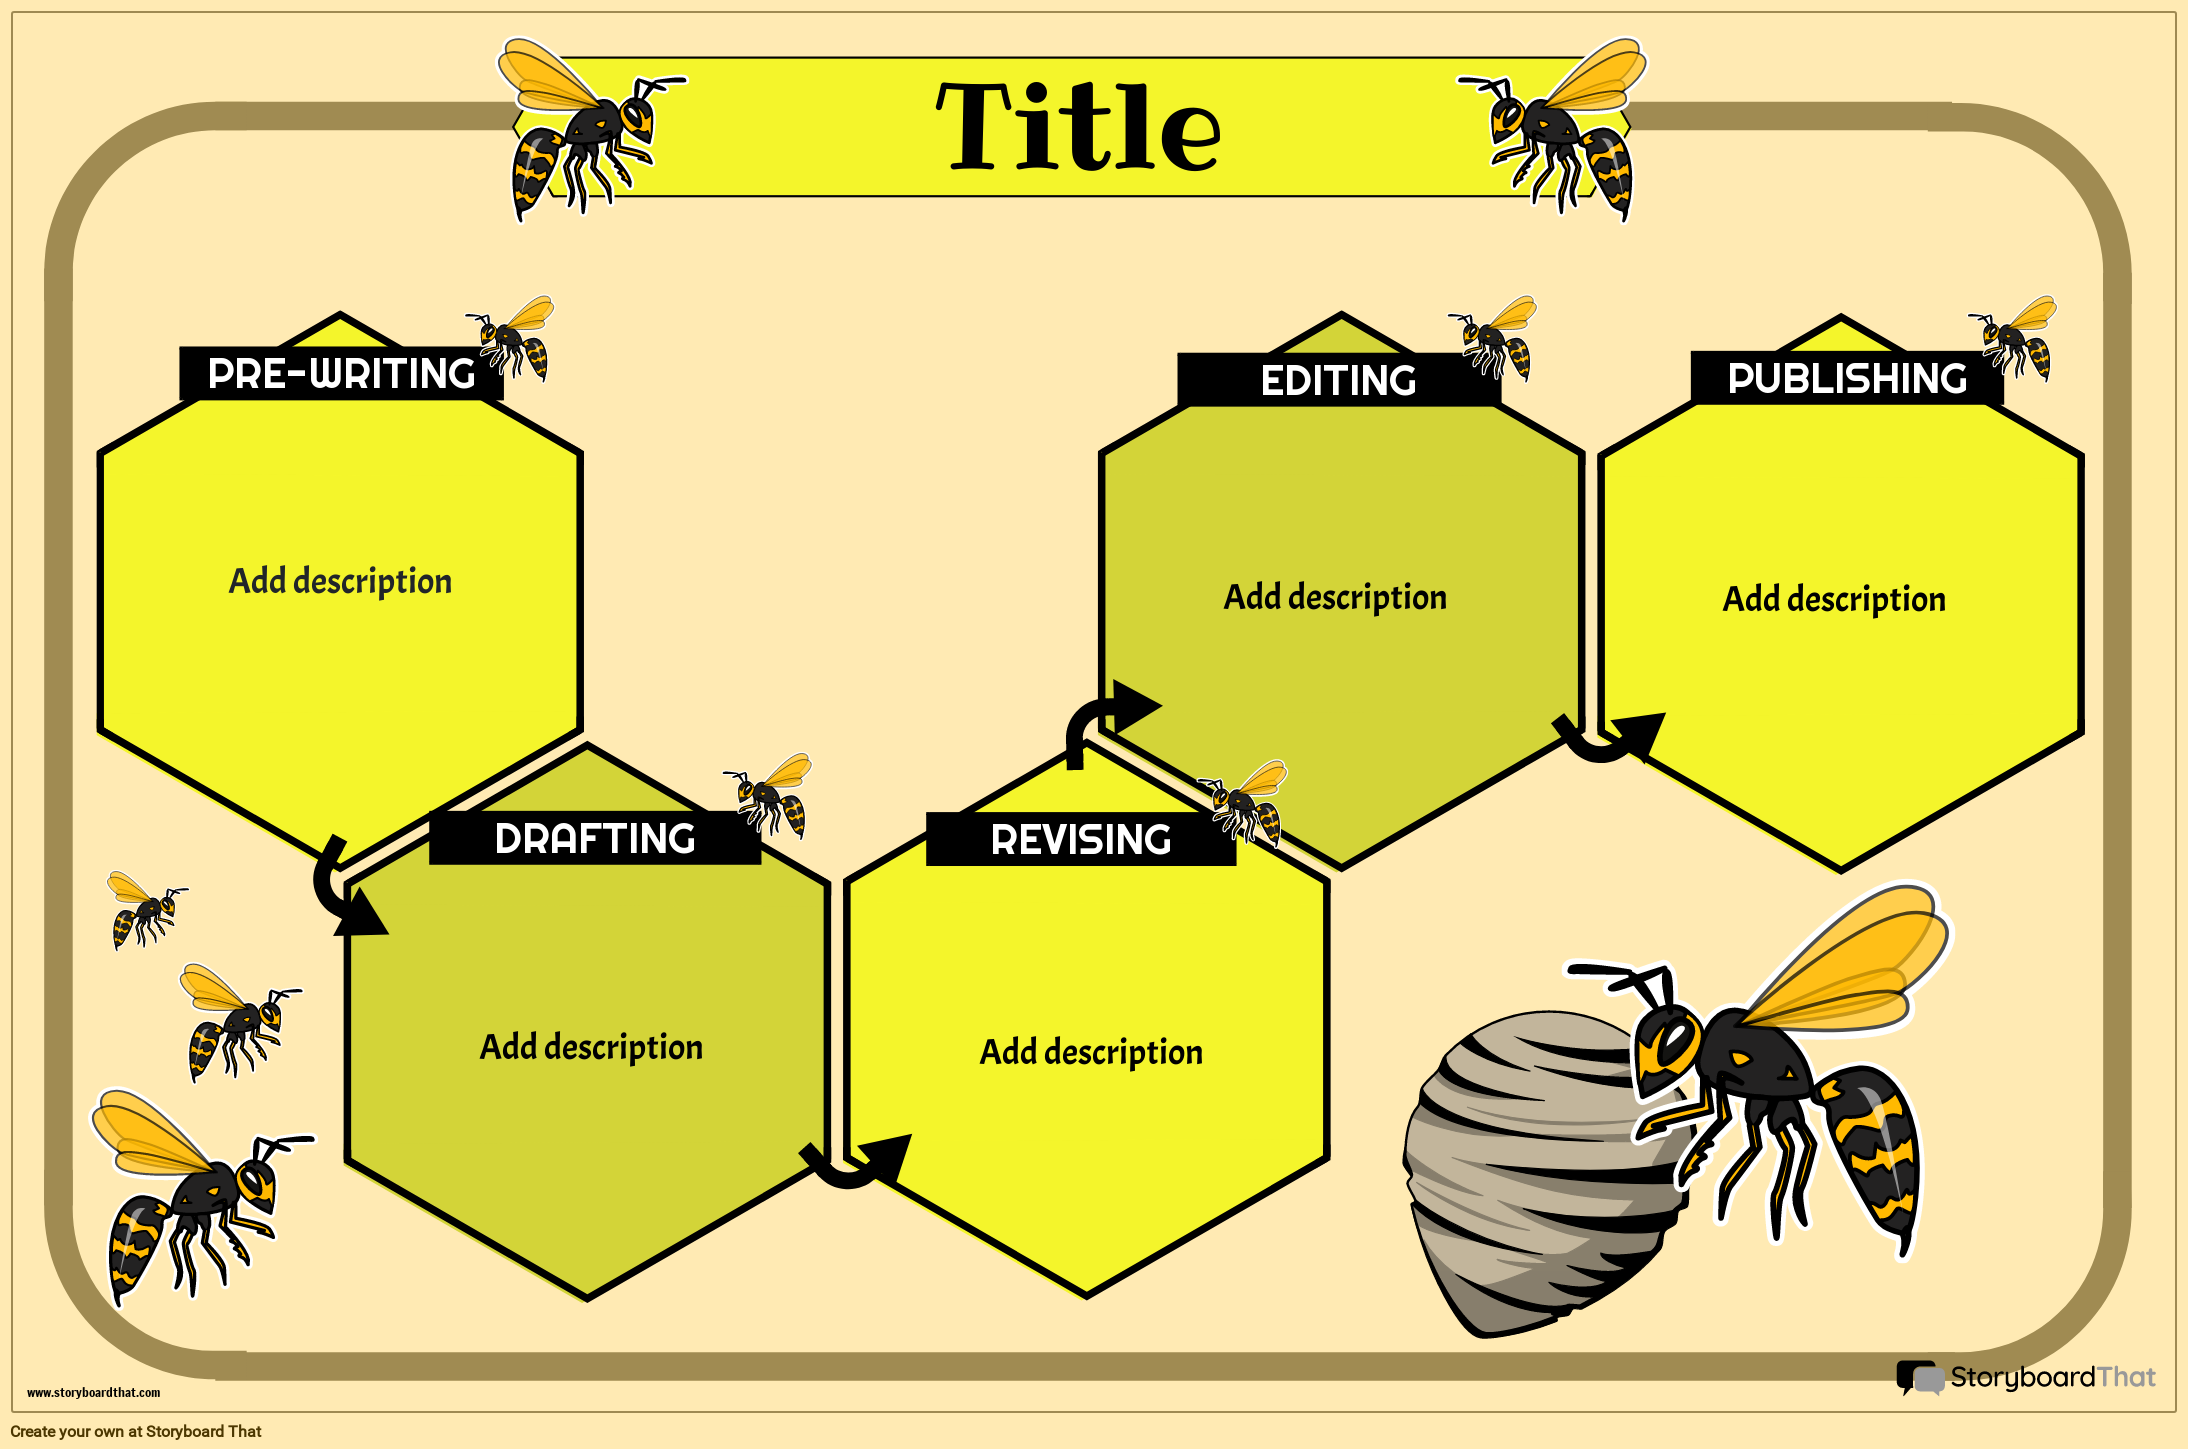 BEEHIVE THEMED WRITING PROCESS POSTER